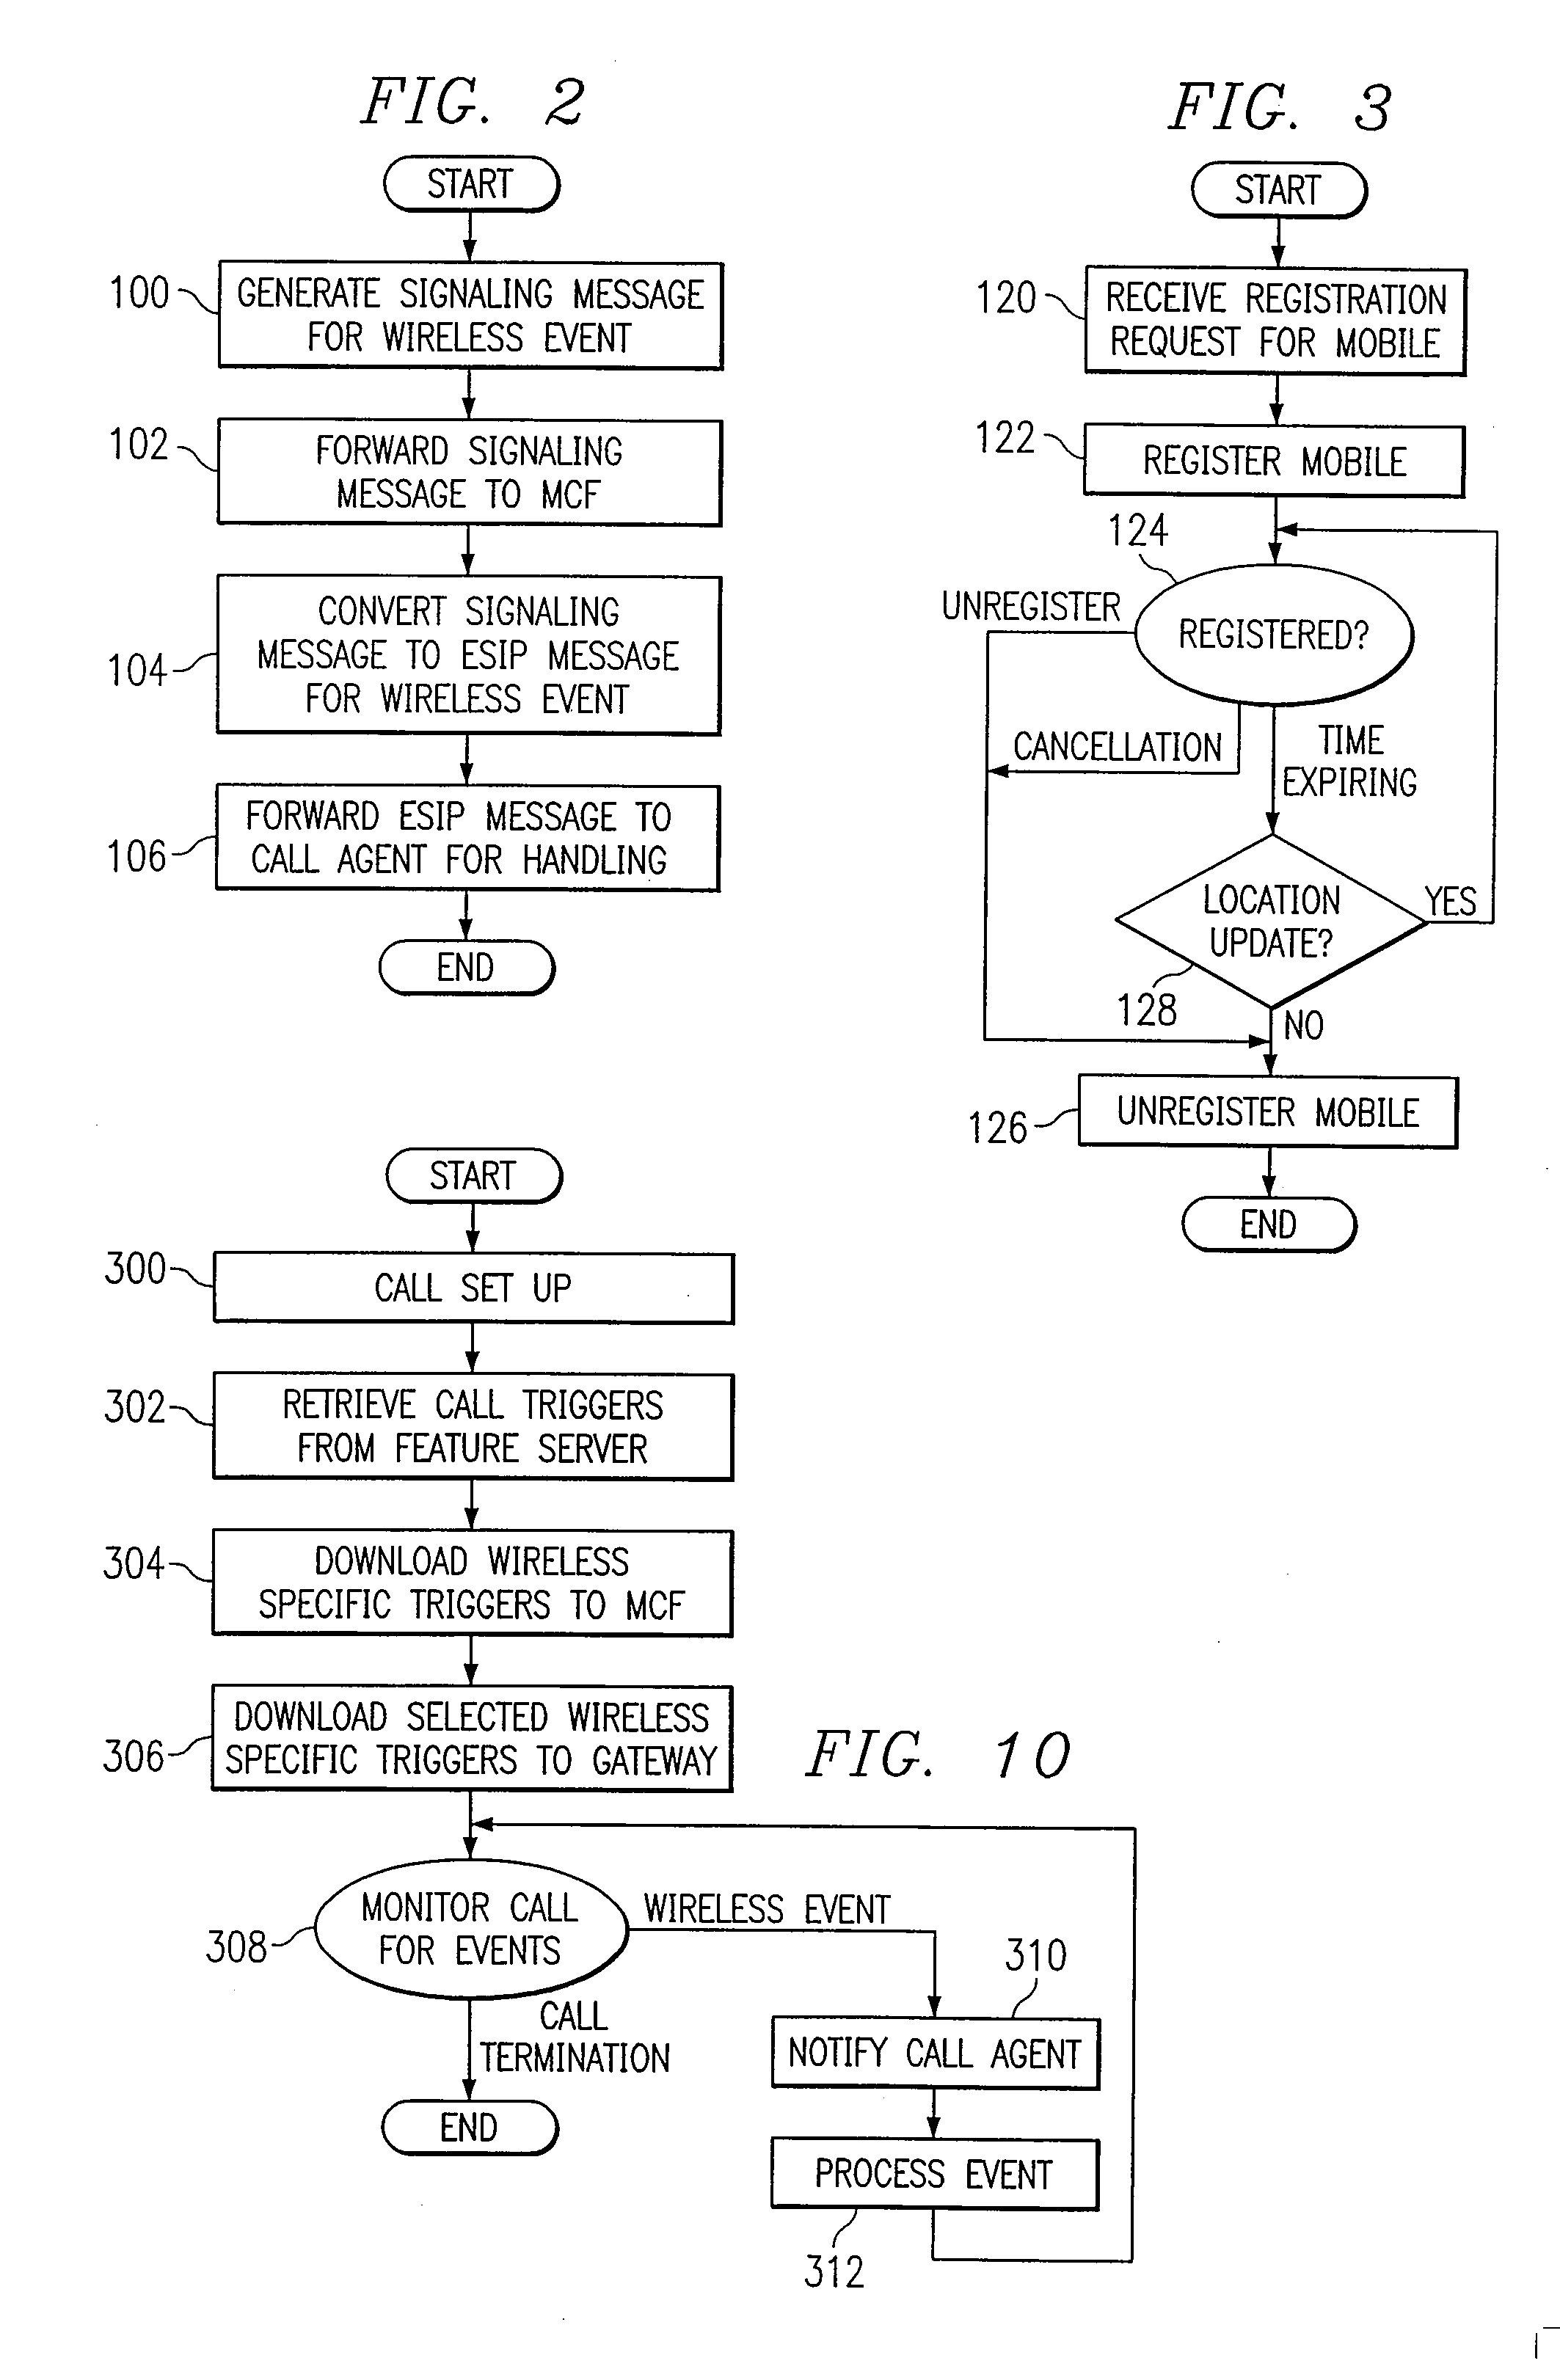 Method and System of Control Signaling for a Wireless Access Network